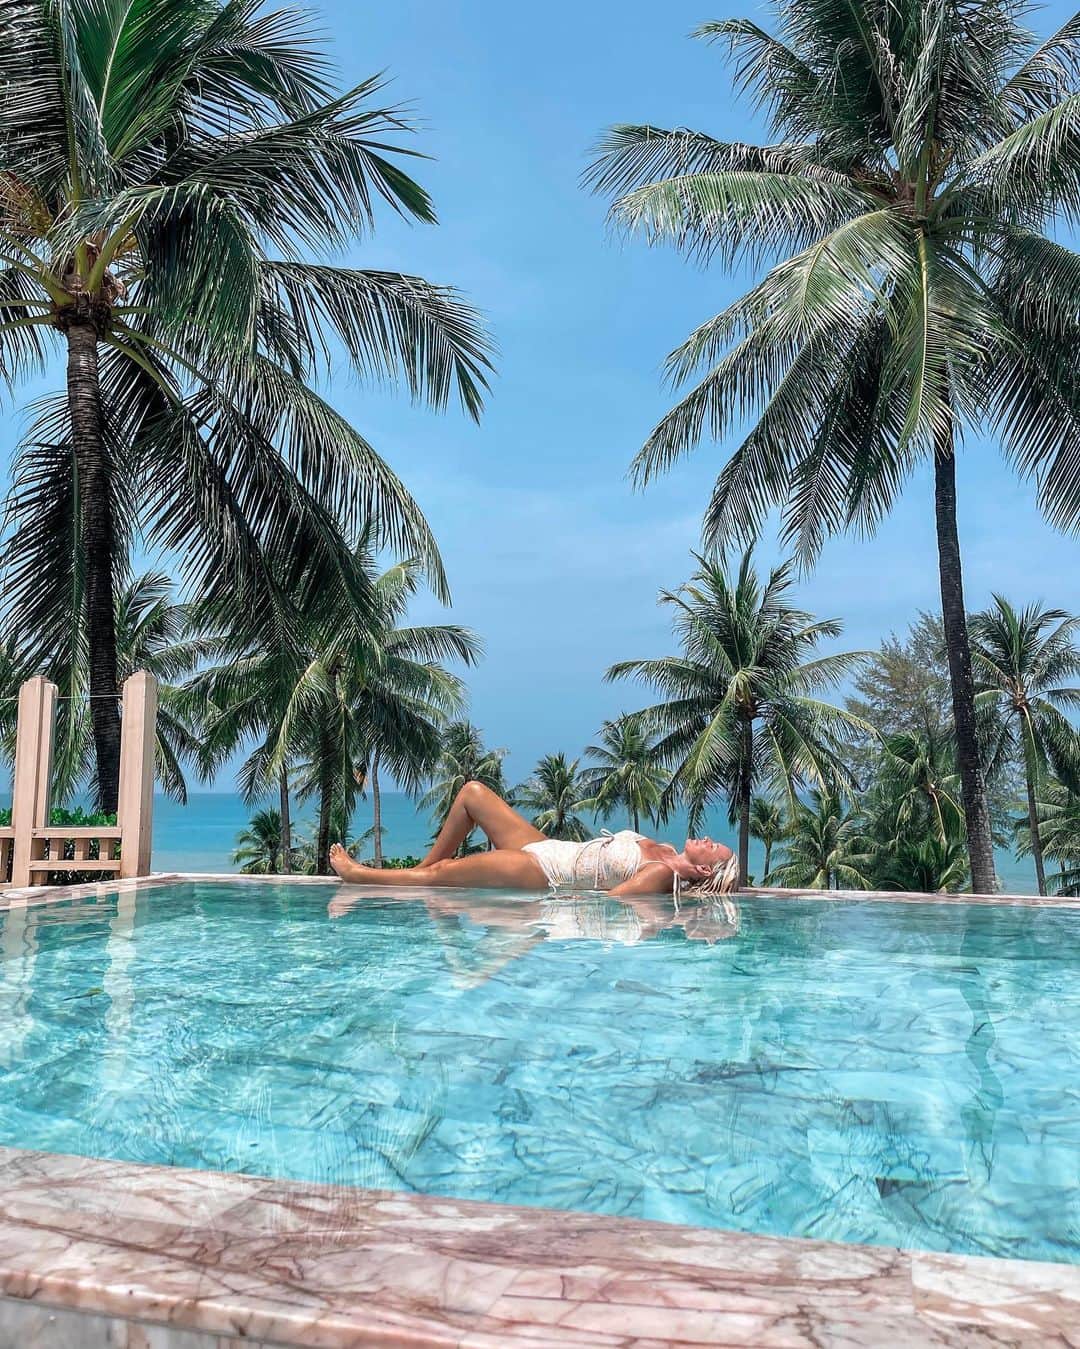 さんのインスタグラム写真 - (Instagram)「Floating on a cloud at @devasom_resorts 🩵 A must stay for your next trip to Khao Lak Thailand 🏝️  Which pic is your favorite? 1, 2, 3, 4…..10?  Here’s what we loved most -  ✨ Sustainability and social responsibility at the heart of everything they do. Every morning they do beach clean ups 👏 they provide nourishing school lunches to local children and employ the local community, creating a harmonious work environment that can be felt by all the guests 👏  ✨ The rooms are immaculate! And there are many types to suit varying budgets. We stayed in the Seaside Pool Paradise Suite and the Devasom Sky Penthouse villa. We loved the Sky Villa’s expansive views and space, the long infinity pool, steam room and spa. The views from the Seaside suites are equally impressive overlooking the ocean and lagoon. Beds were so luxurious and comfortable in both and we slept so deeply every single night 😴   ✨ The food! The delicious vegan food! 👏 The menu had many amazing options. There are 2 restaurants - Takola, which is traditional Thai food, and the Beachfront Restaurant which is western cuisine. We loved them both but I can’t go past Thai food when in Thailand. It’s just so good 🌶️   ✨ There is so much to do at the resort - complimentary stand up paddle boarding and kayaking in the lagoon, forest bathing, eco cycling tours, yoga and meditation in the lagoon tower, a day spa with the best Thai treatments you’ll ever have, and a shuttle bus that can take you to town and back. Take a complimentary bike and explore local villages, temples and the coconut mangroves. There’s also a stunning main pool with beach and pool lounges, a beach bar and restaurant for food/cocktails/mocktails. They can even set up a beautiful beach sunset picnic or private group dining experience for you 🌅   This was the most fantastic week in Thailand, rich with adventure, fun, yummy food and relaxation. My favorite combination. I highly recommend Khao Lak and @devasom_resorts for your next Thailand travel experience 🏝️  #devasomkhaolak #penthouse #luxuryresort #visitthailand #thailand #amazingthailand #beautifulhotels」5月29日 19時38分 - helen_jannesonbense